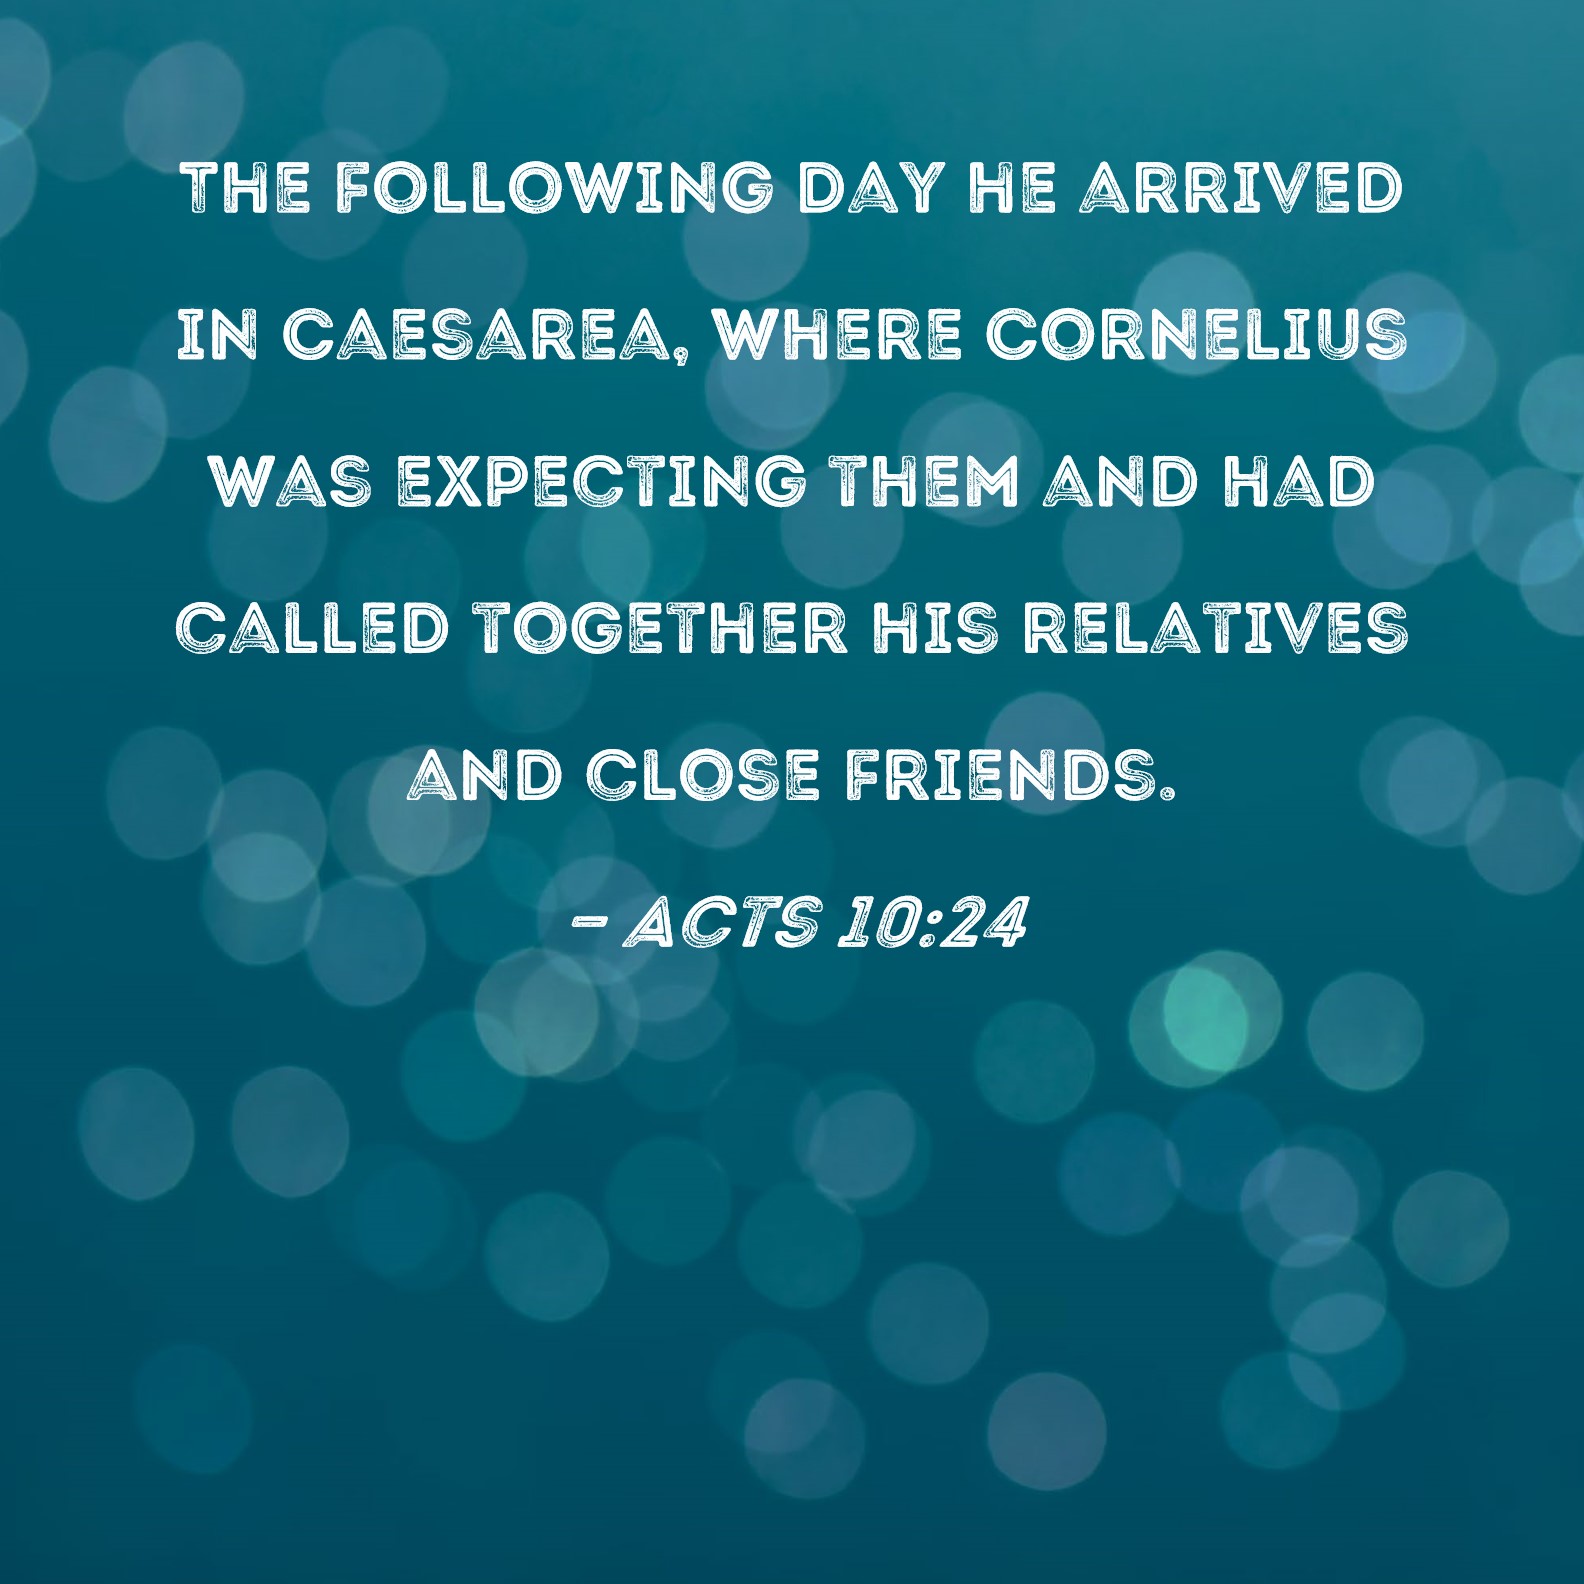 Acts 1024 The following day he arrived in Caesarea, where Cornelius